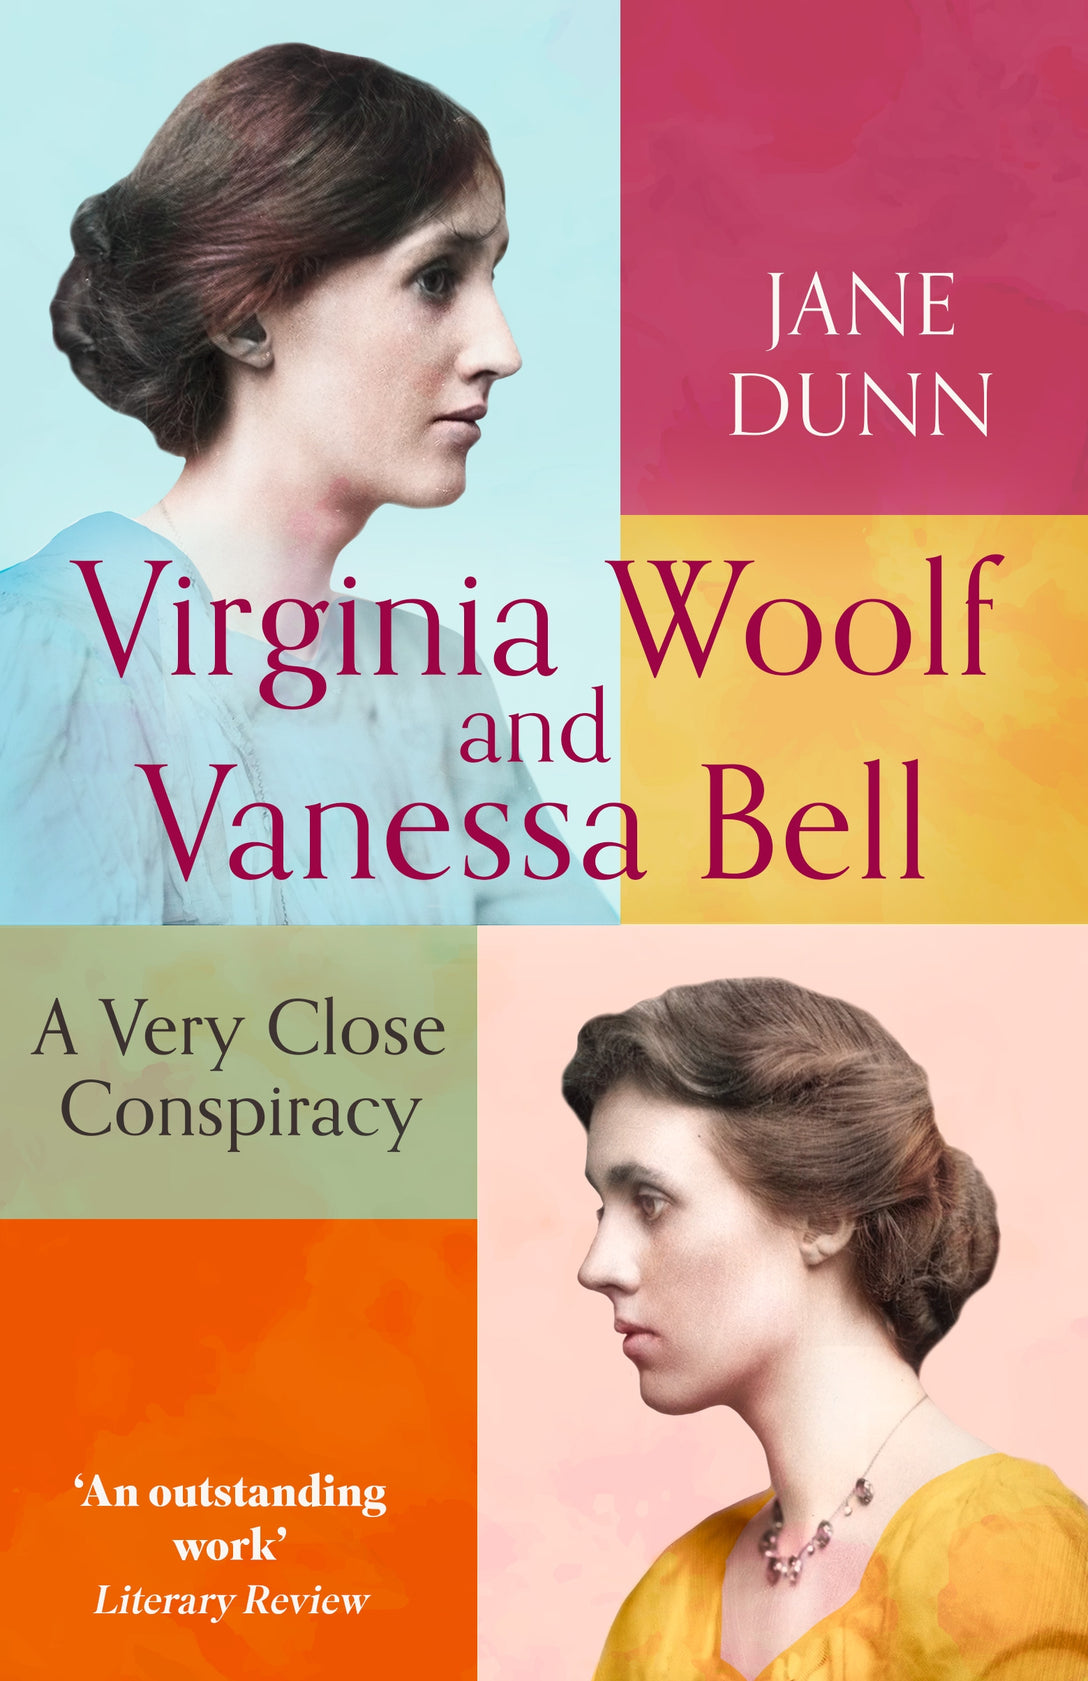 Virginia Woolf And Vanessa Bell by Jane Dunn